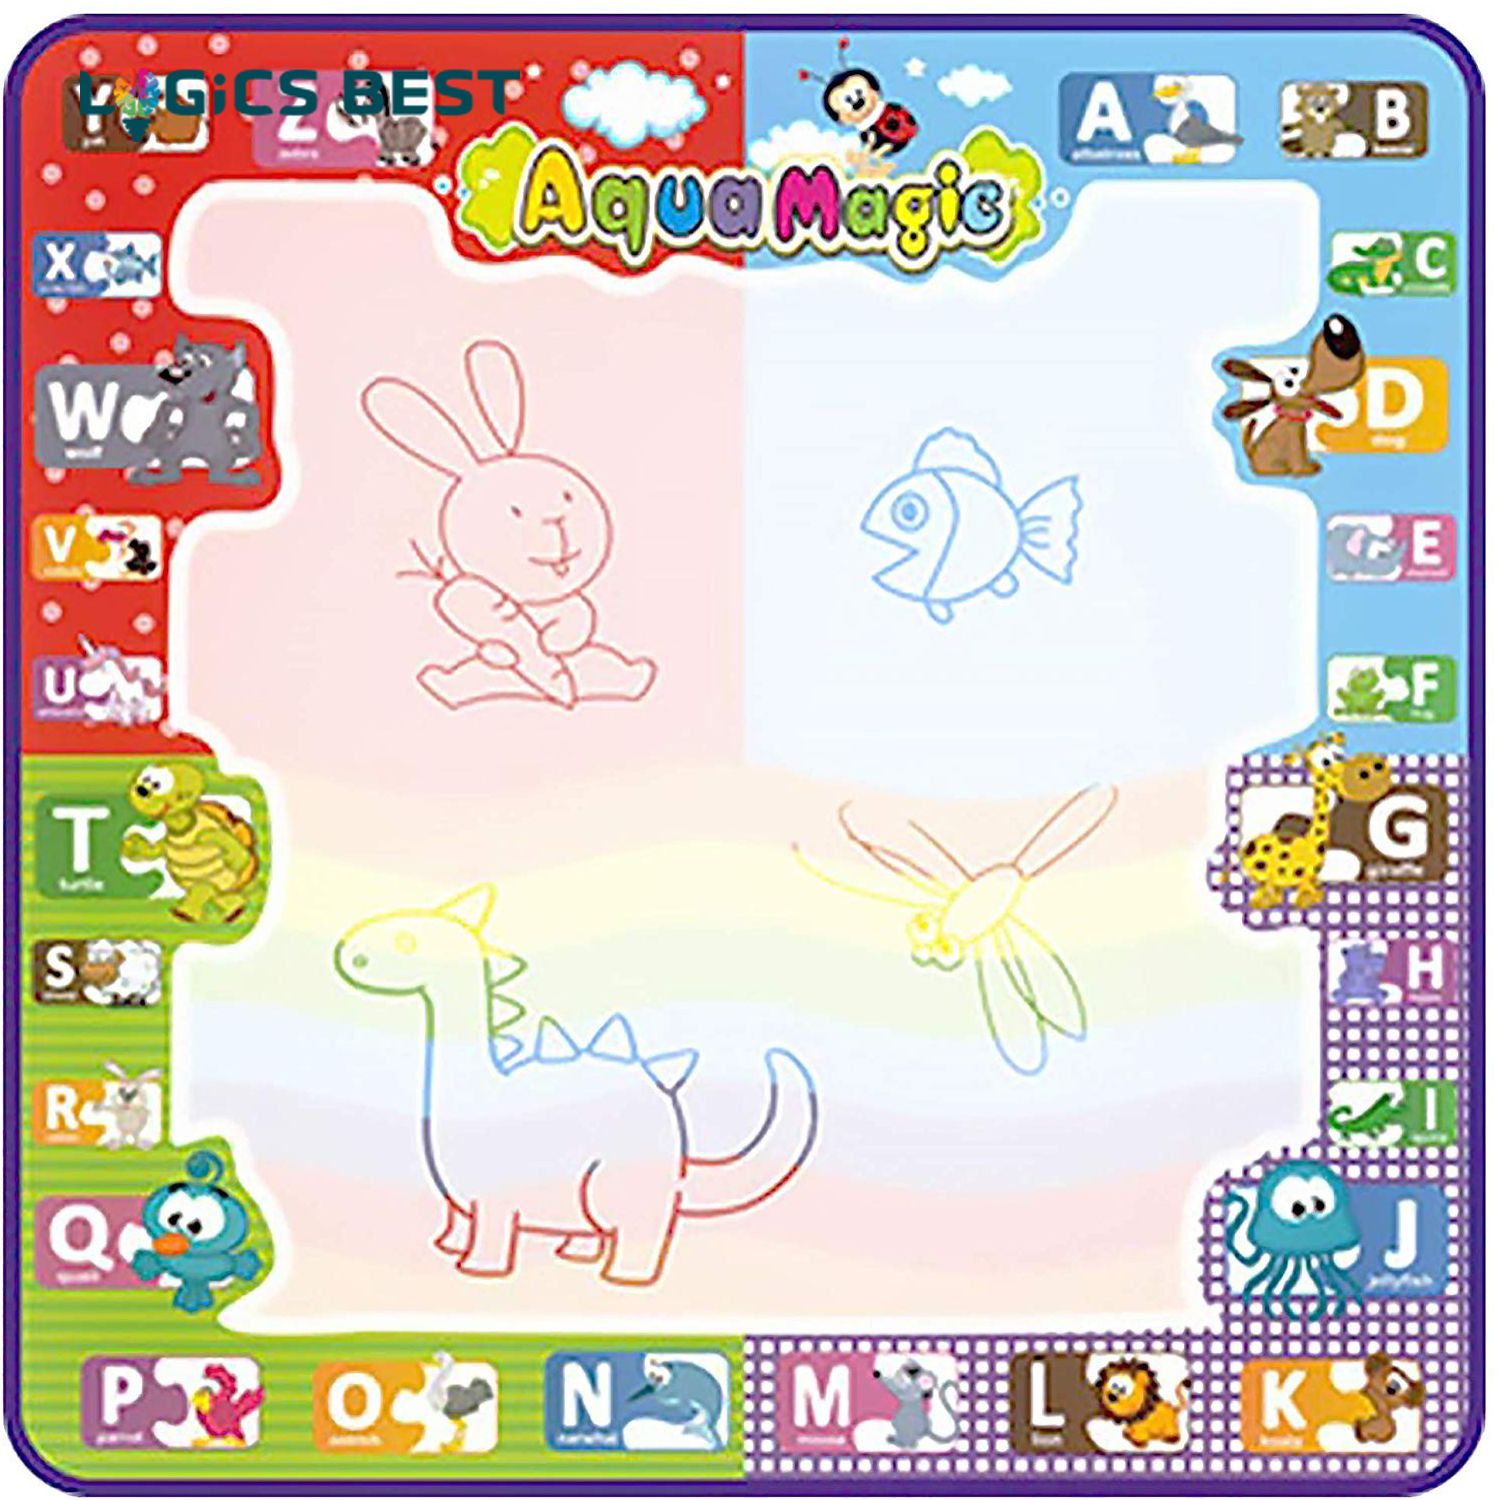 Logics Best Activity Mat for Learning- Premium Water Drawing Mat for K